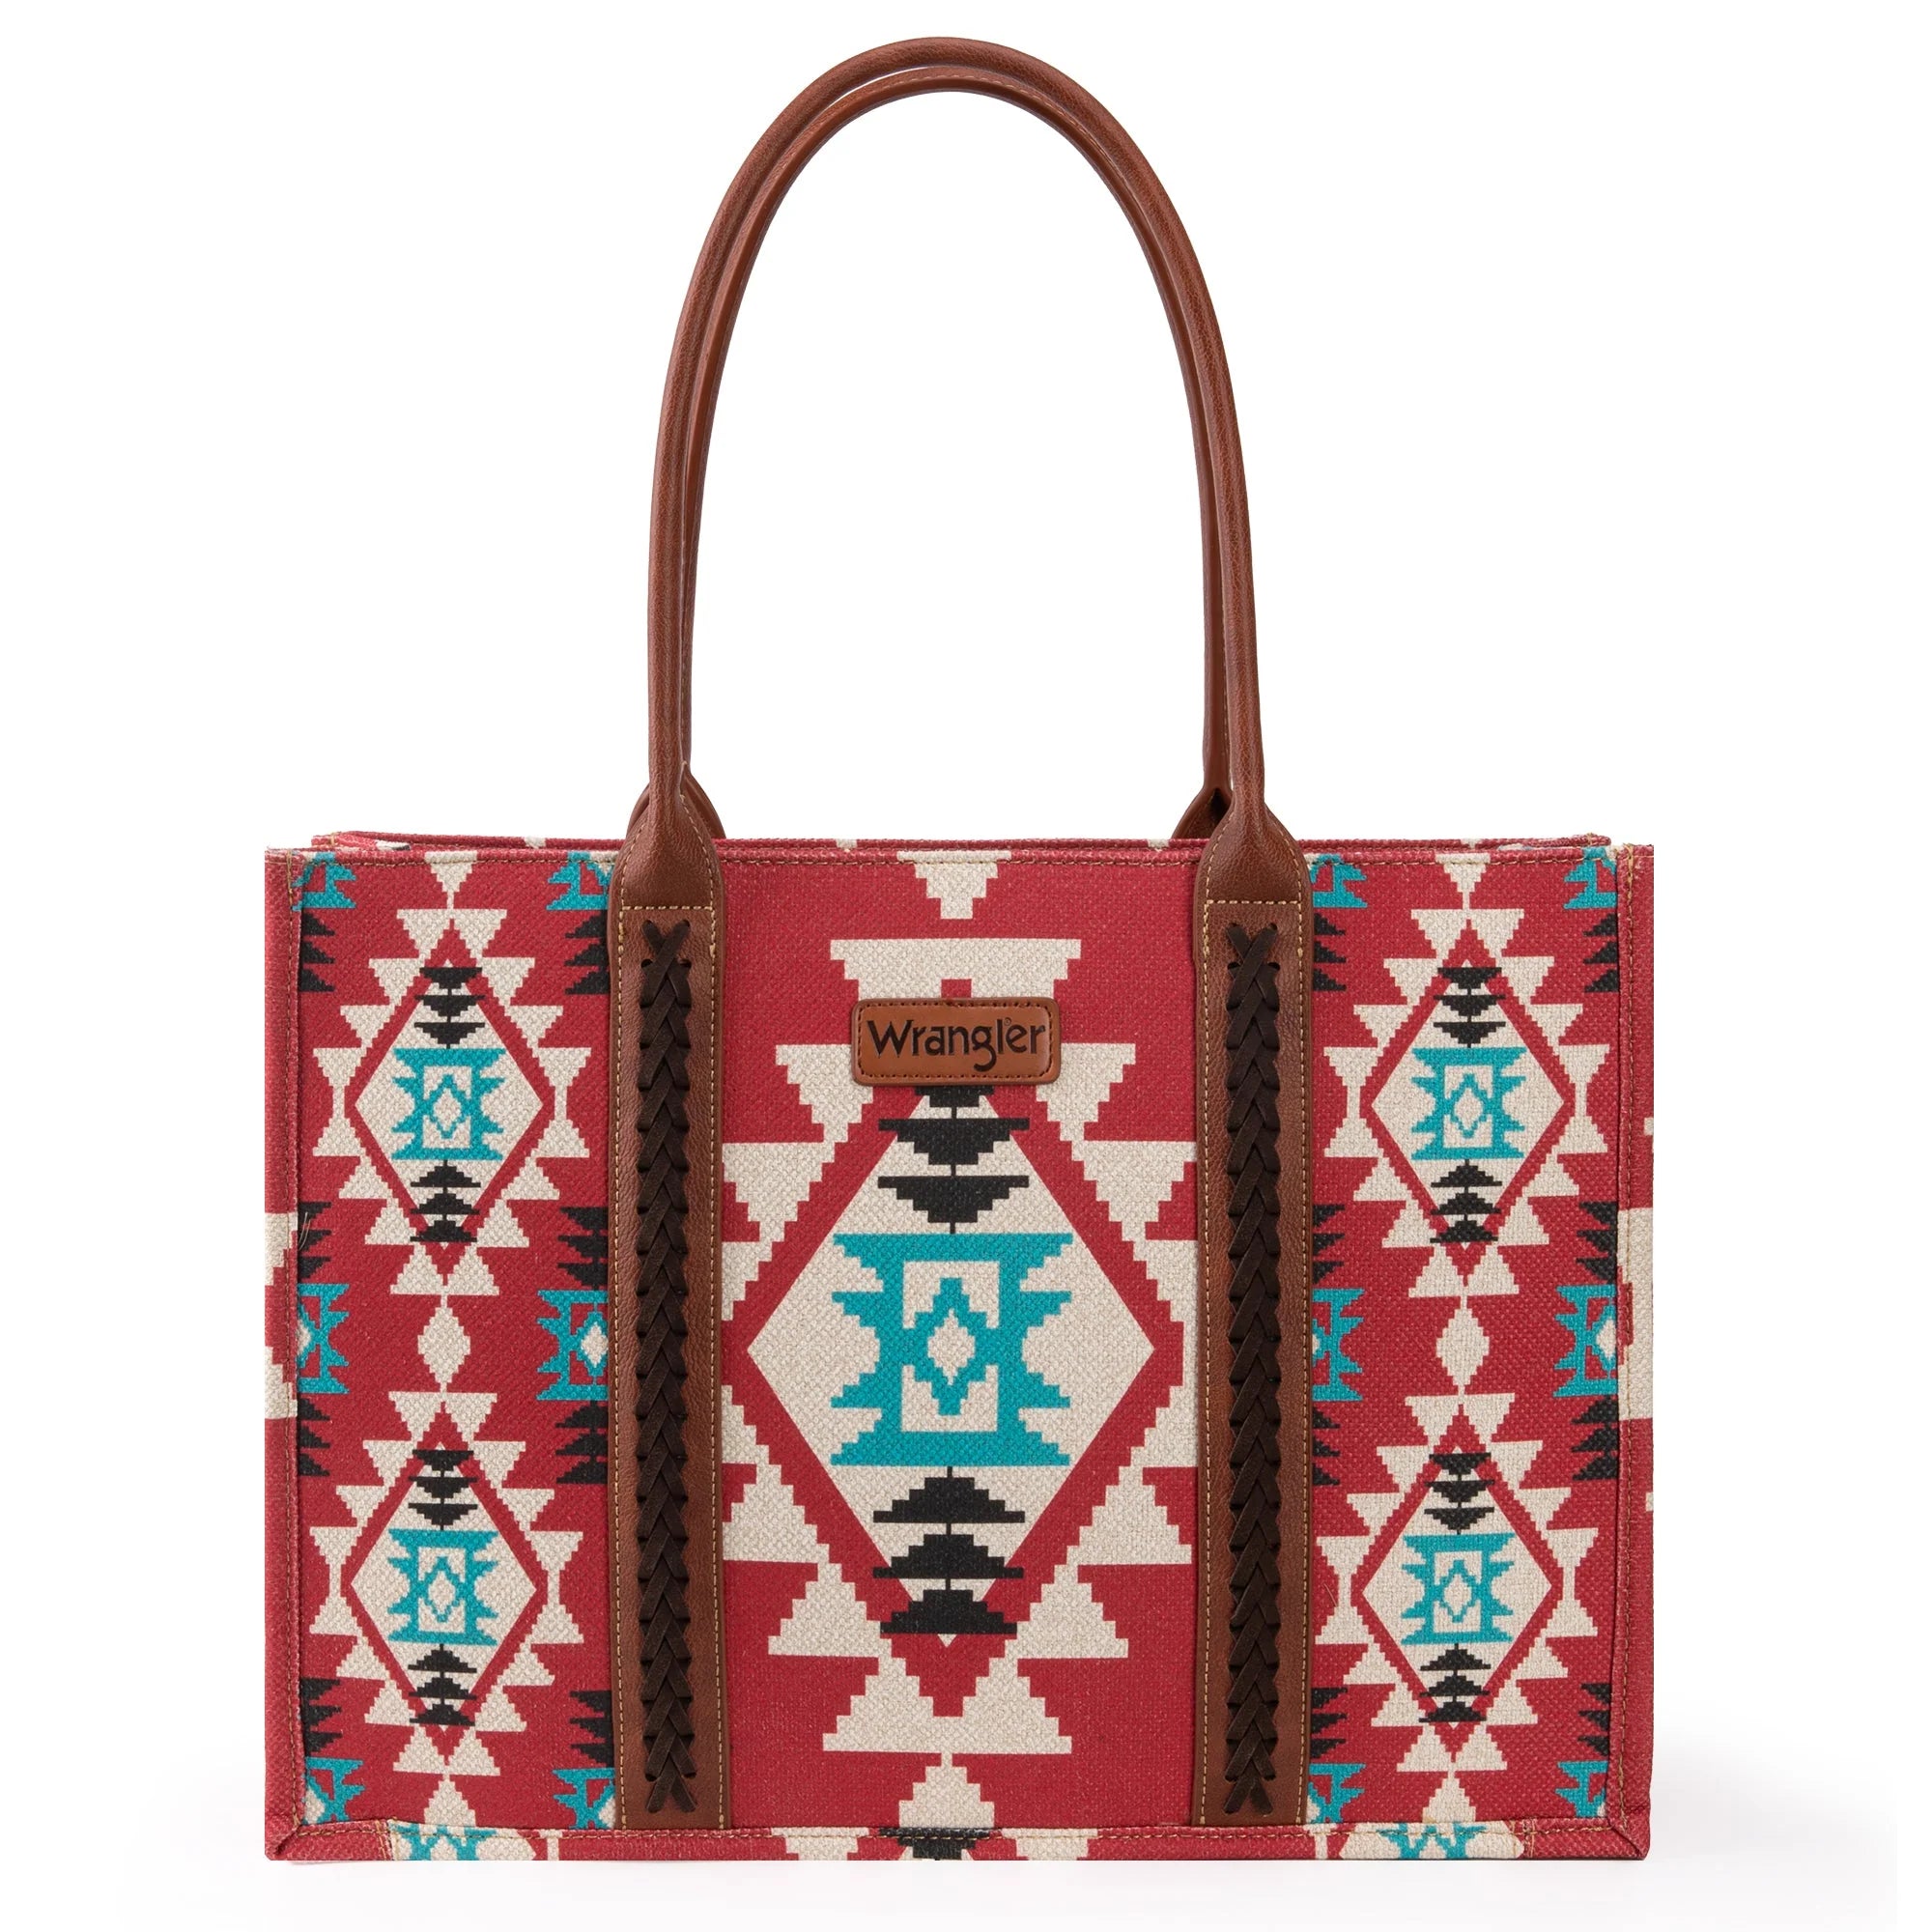 Wrangler Tote Red- New Fall Style!